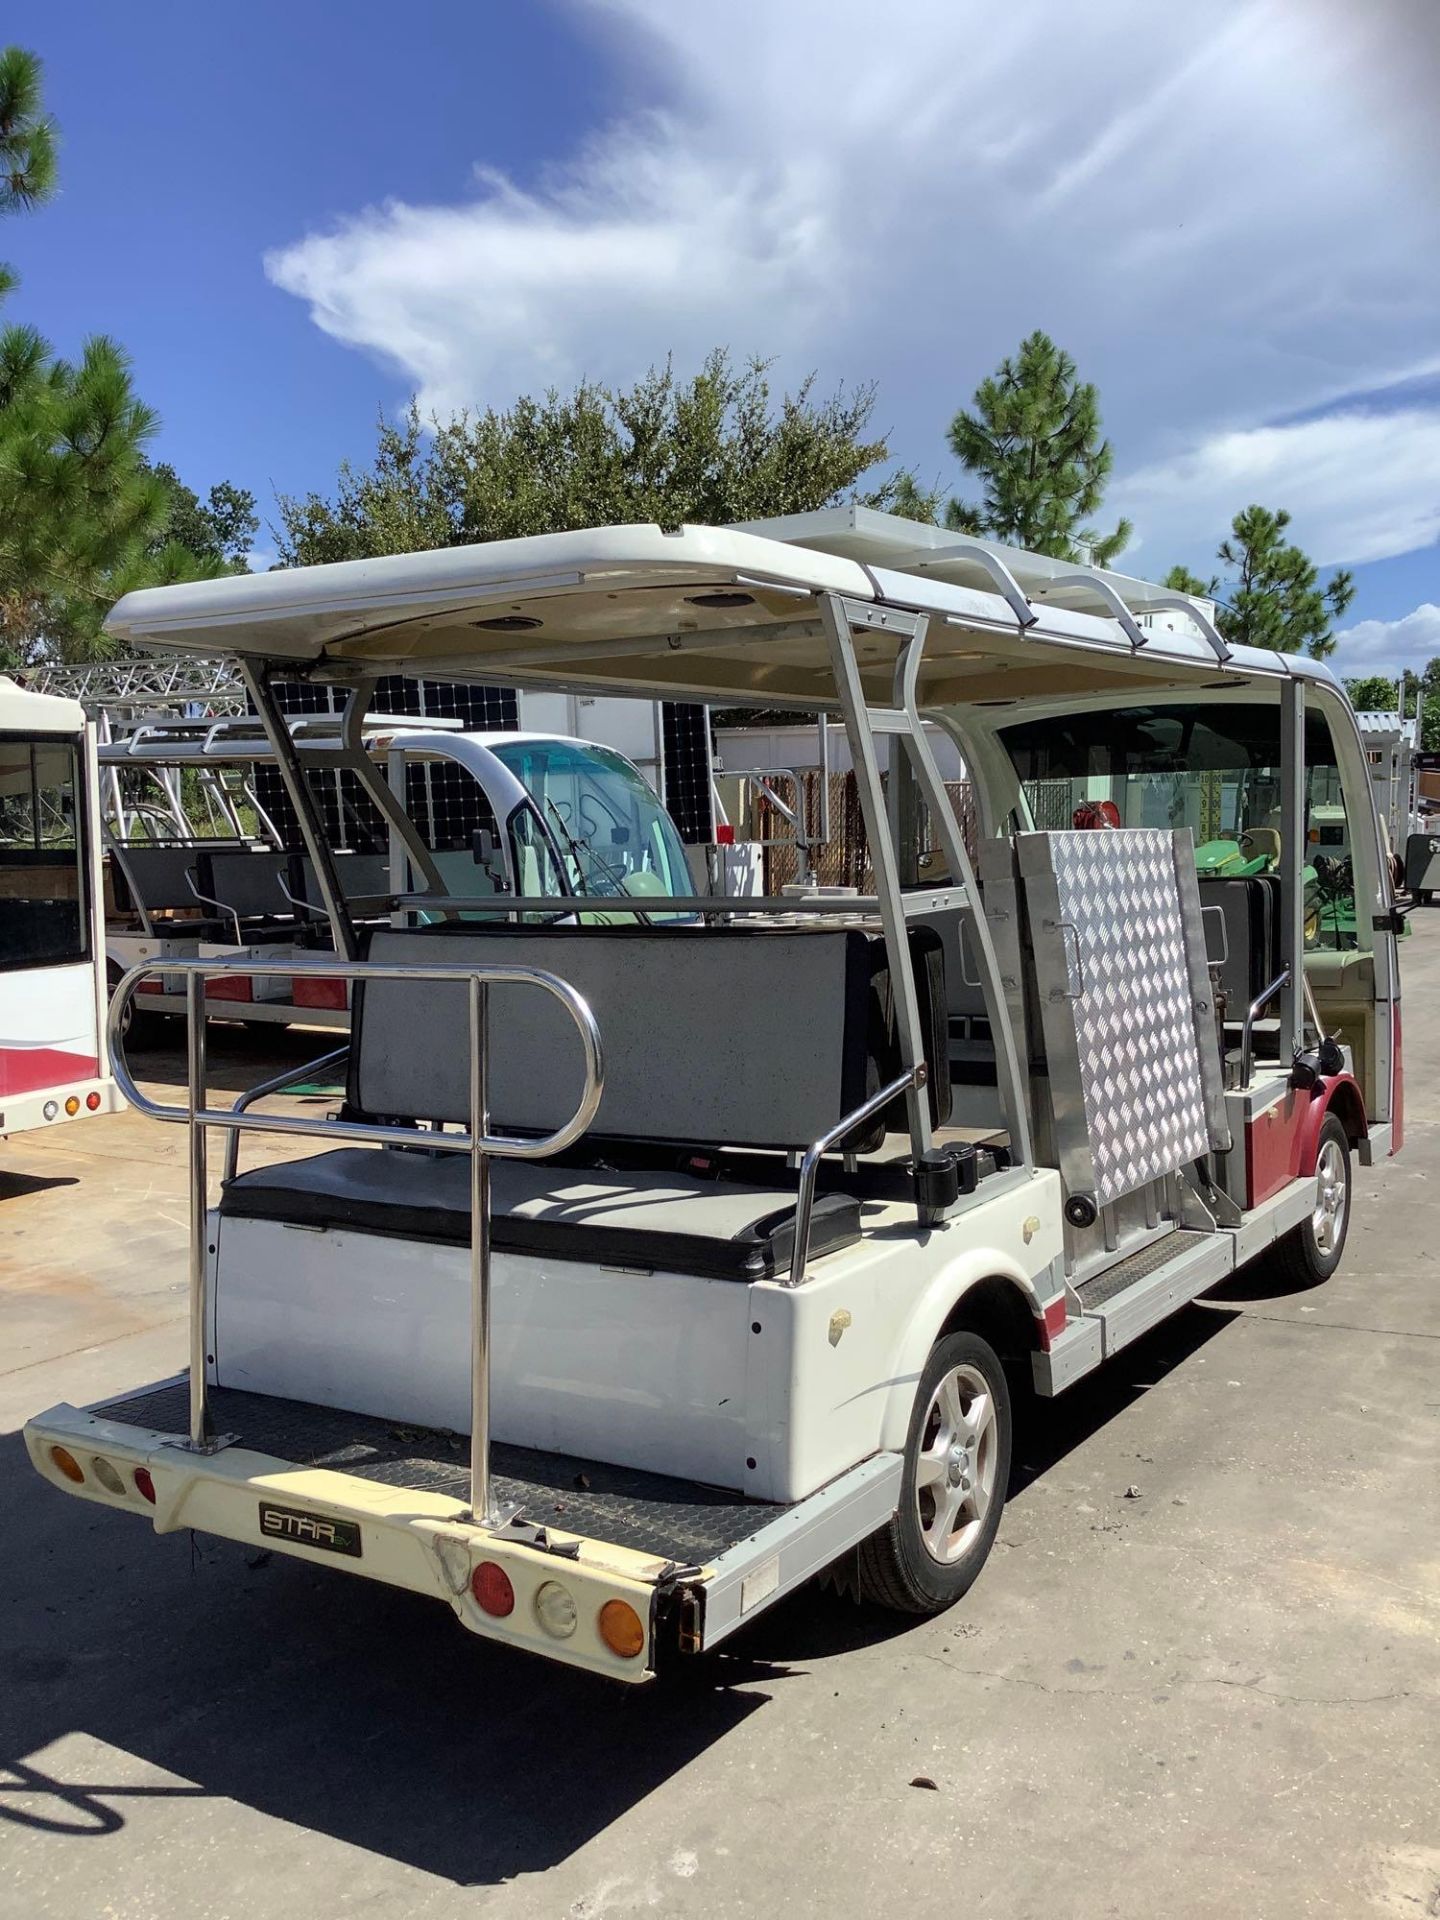 2015 STAR EV SHUTTLE CART MODEL STAR-BN72-11-AC-WHEELCHAIR, ELECTRIC, SOLA PANEL ATTACHED, DOME LIGH - Image 7 of 40